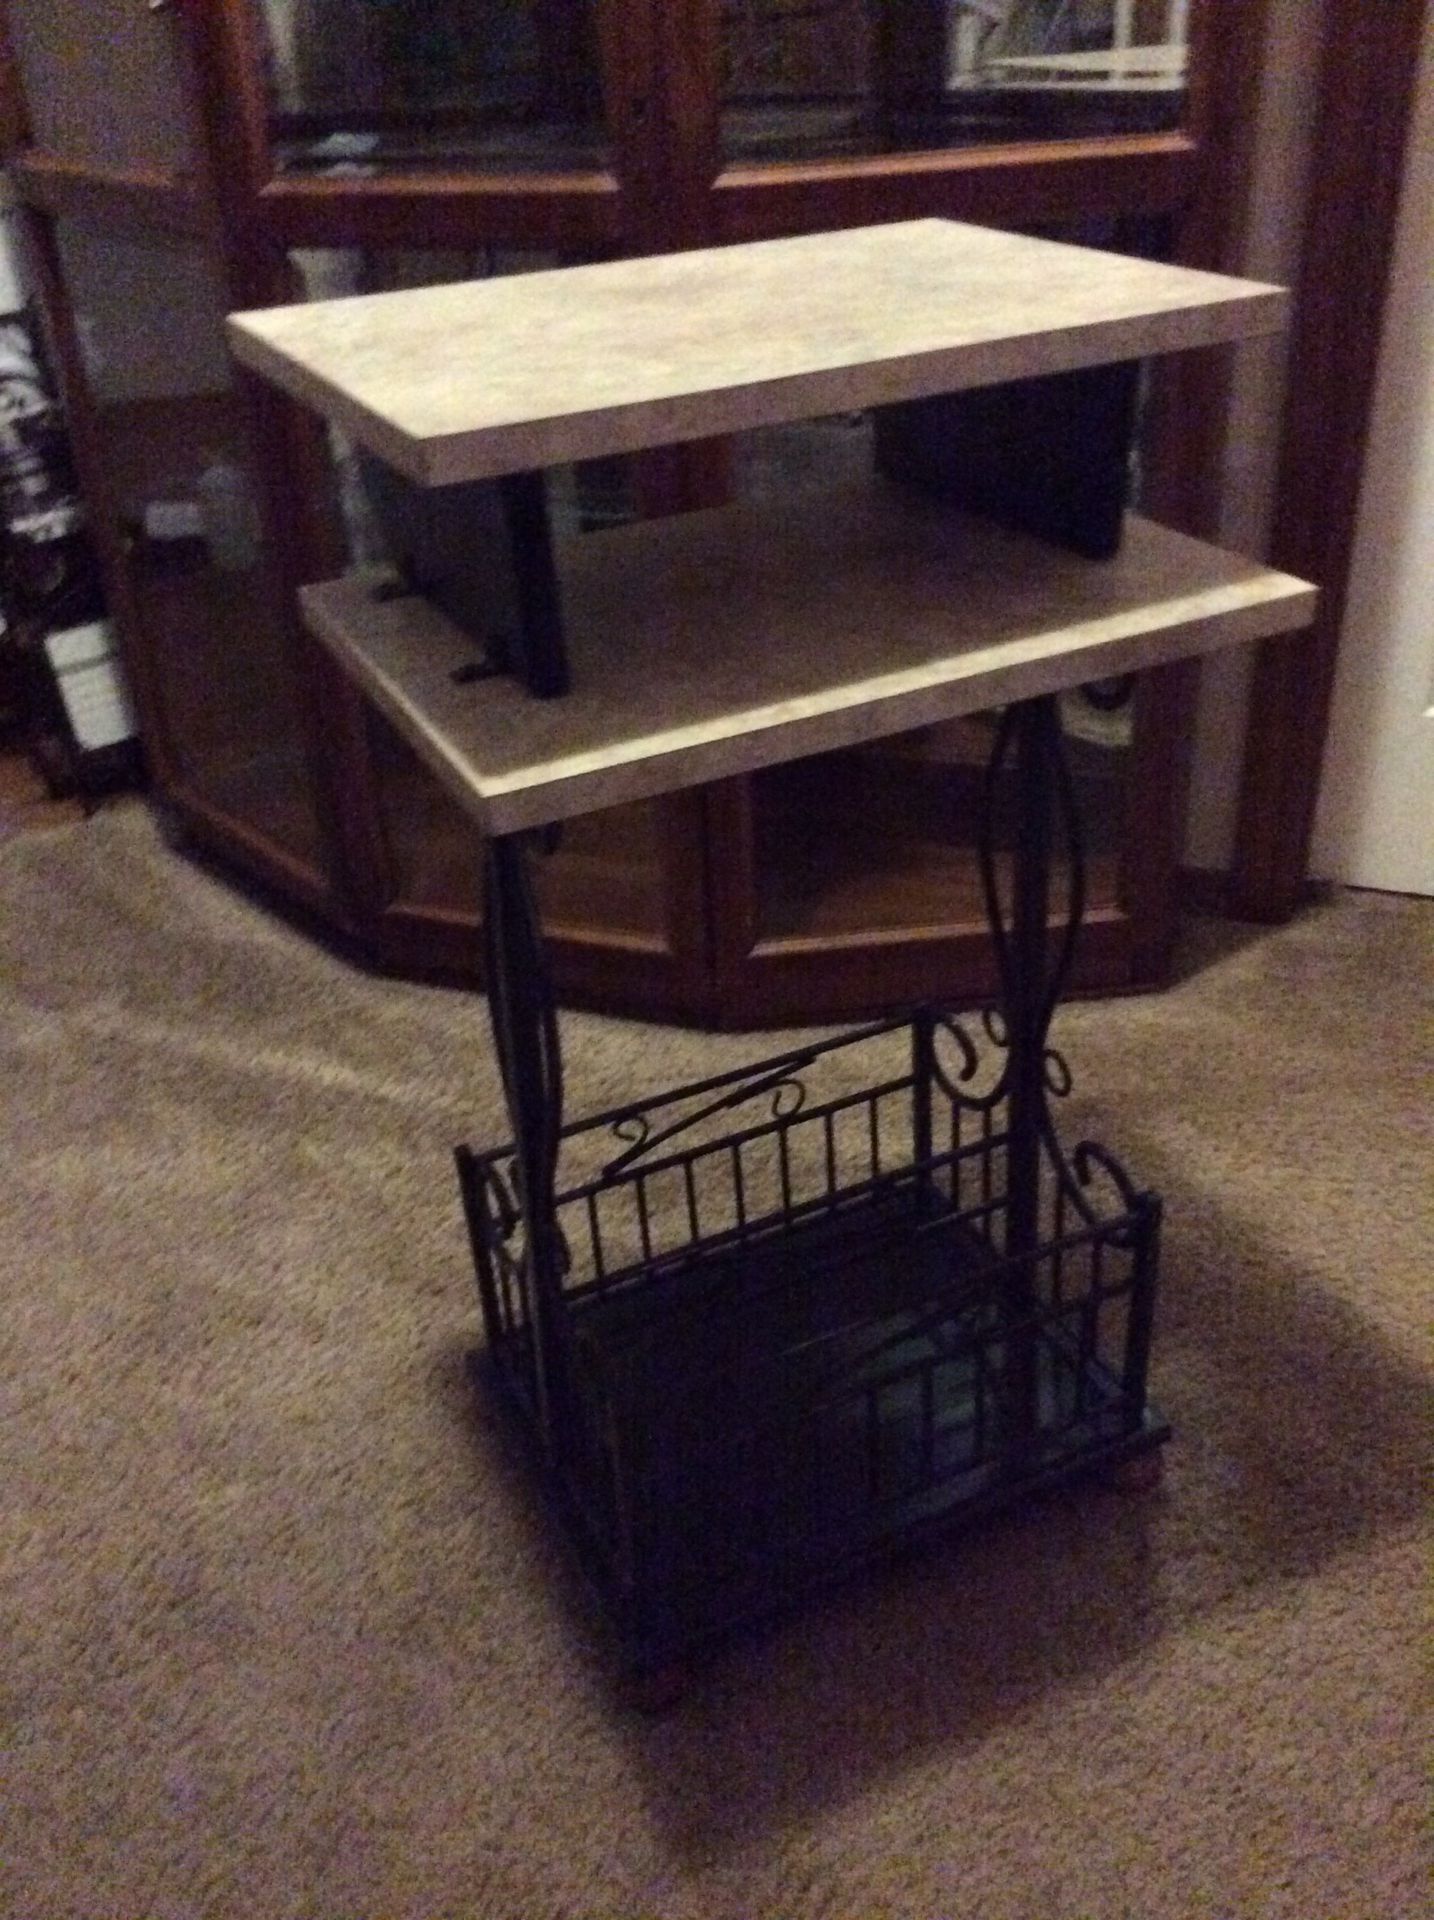 Side stand/magazine rack or little computer desk whatever